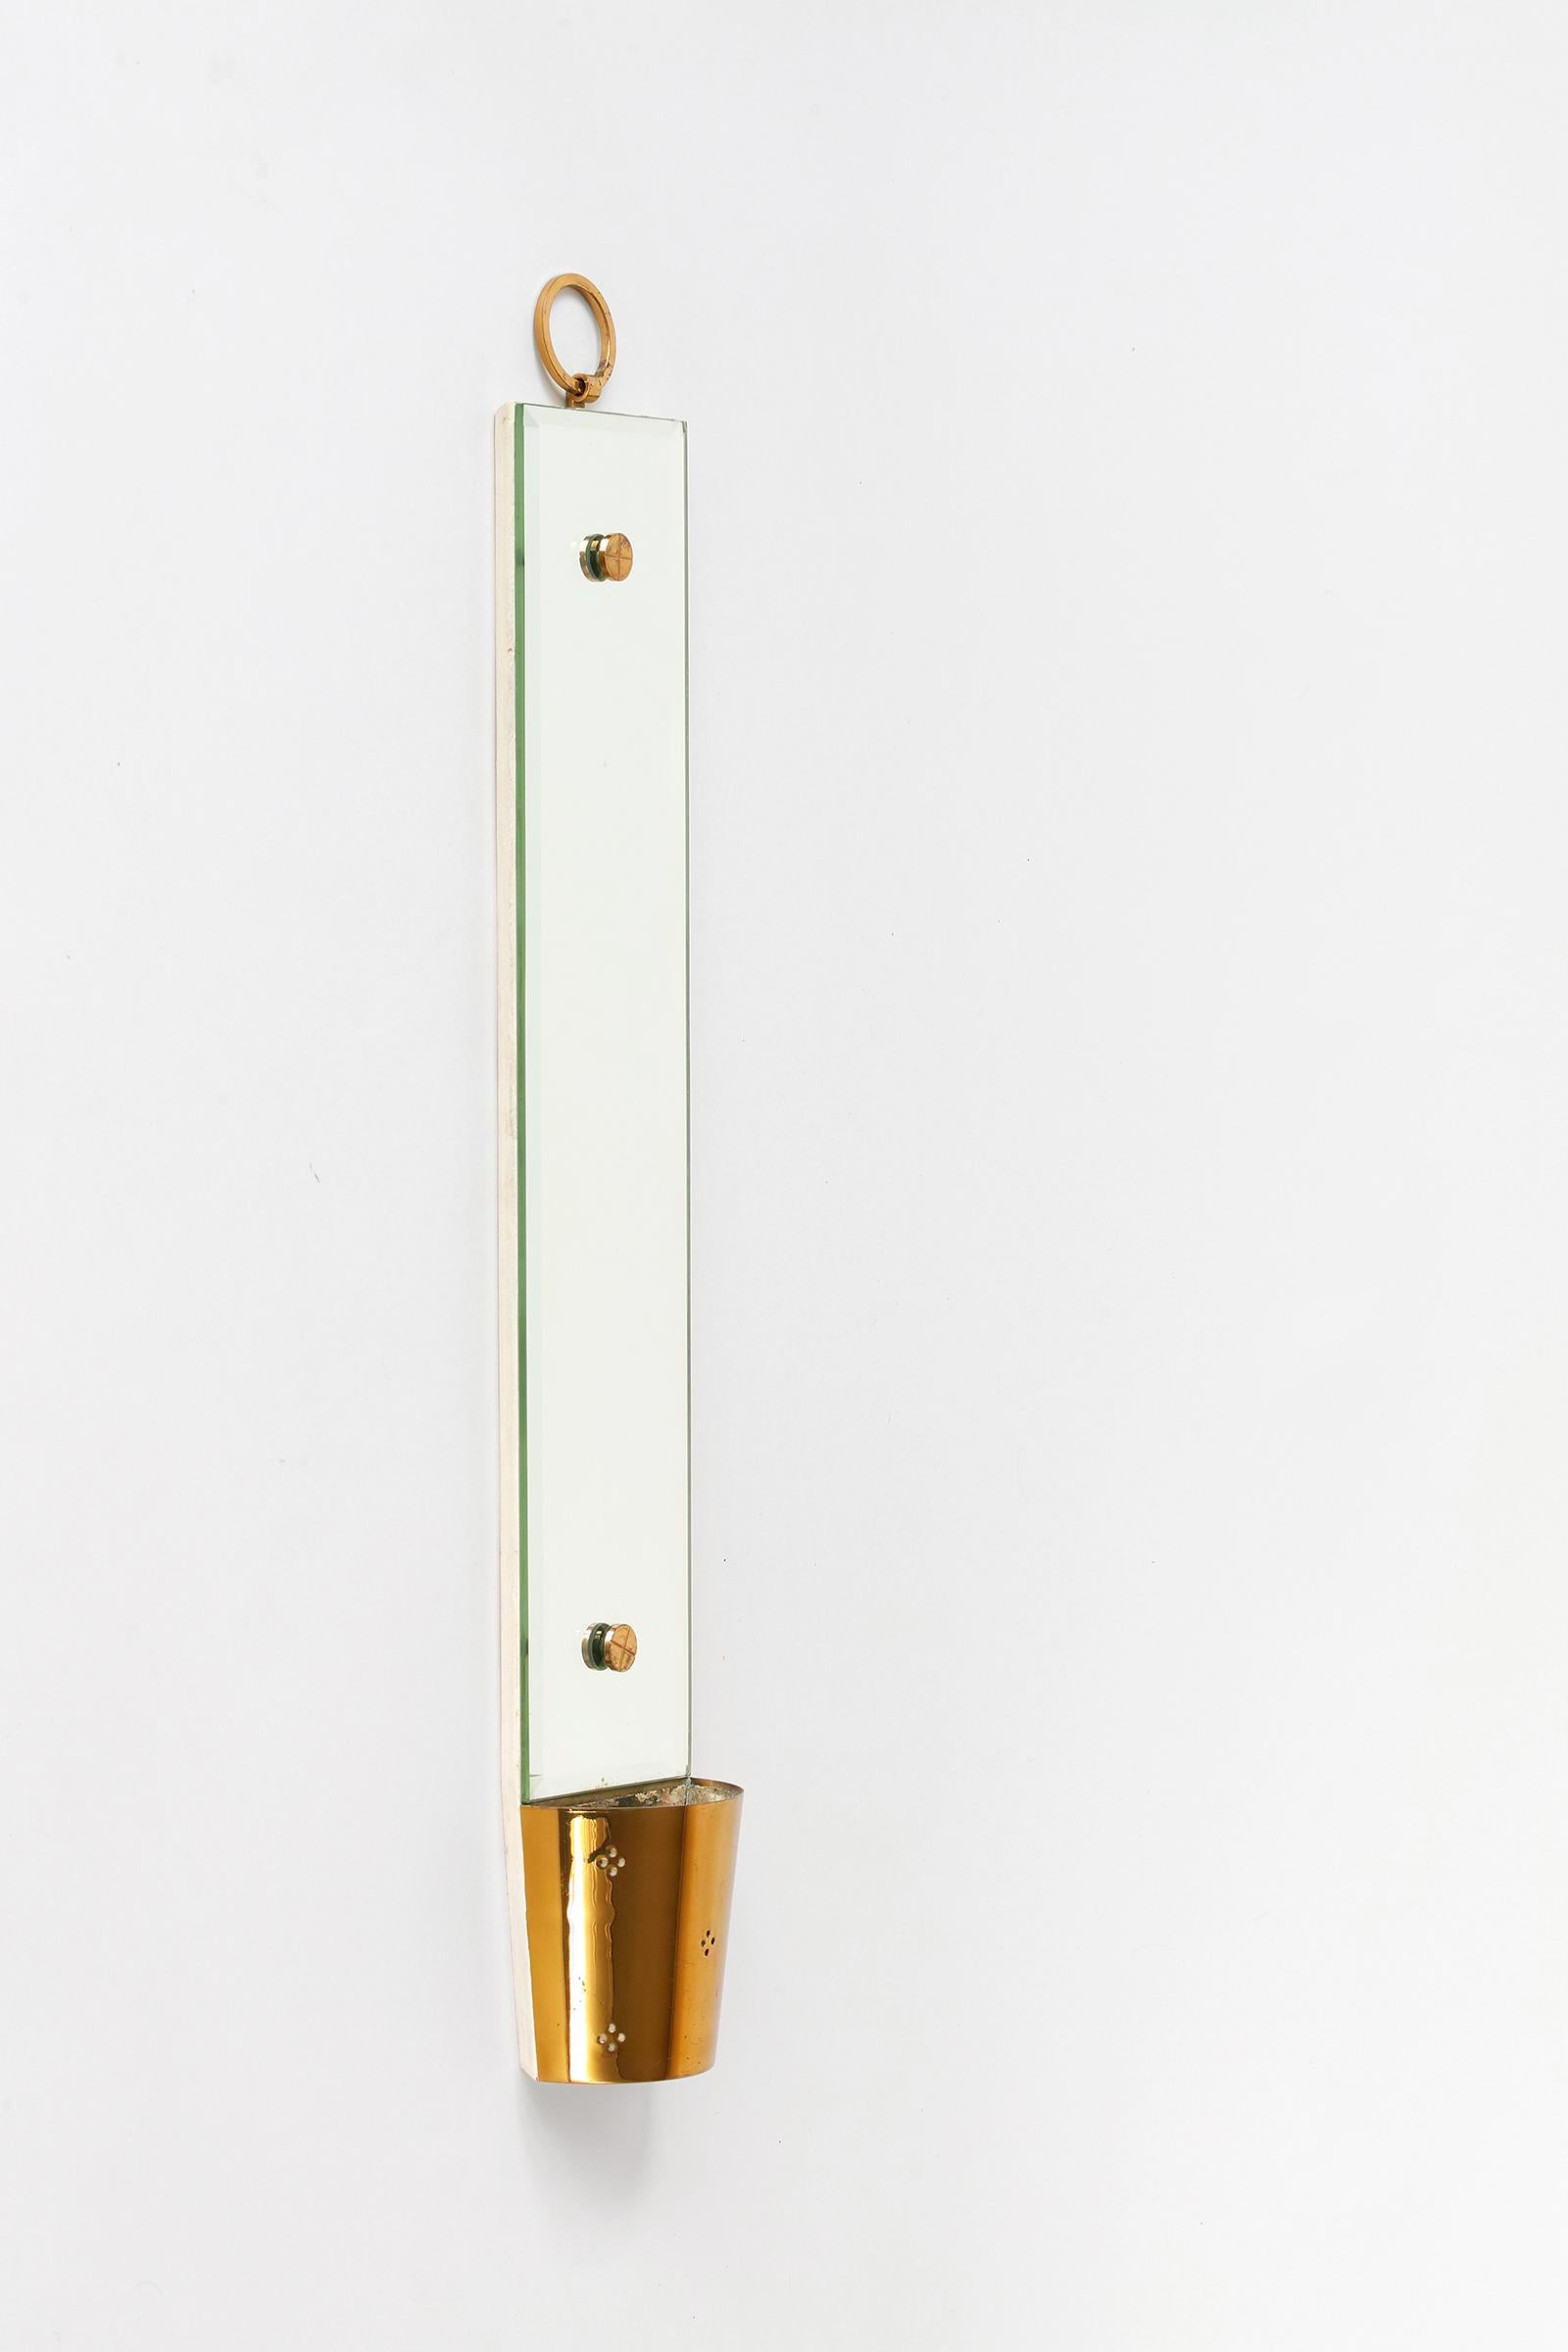 For your consideration is this mid-century modern mirror with planter by Tommi Parzinger. The mirrored glass has beveled edges, is mounted on wood with original white finish and is secured by Parzinger's distinctive x-motif brass hardware. The brass